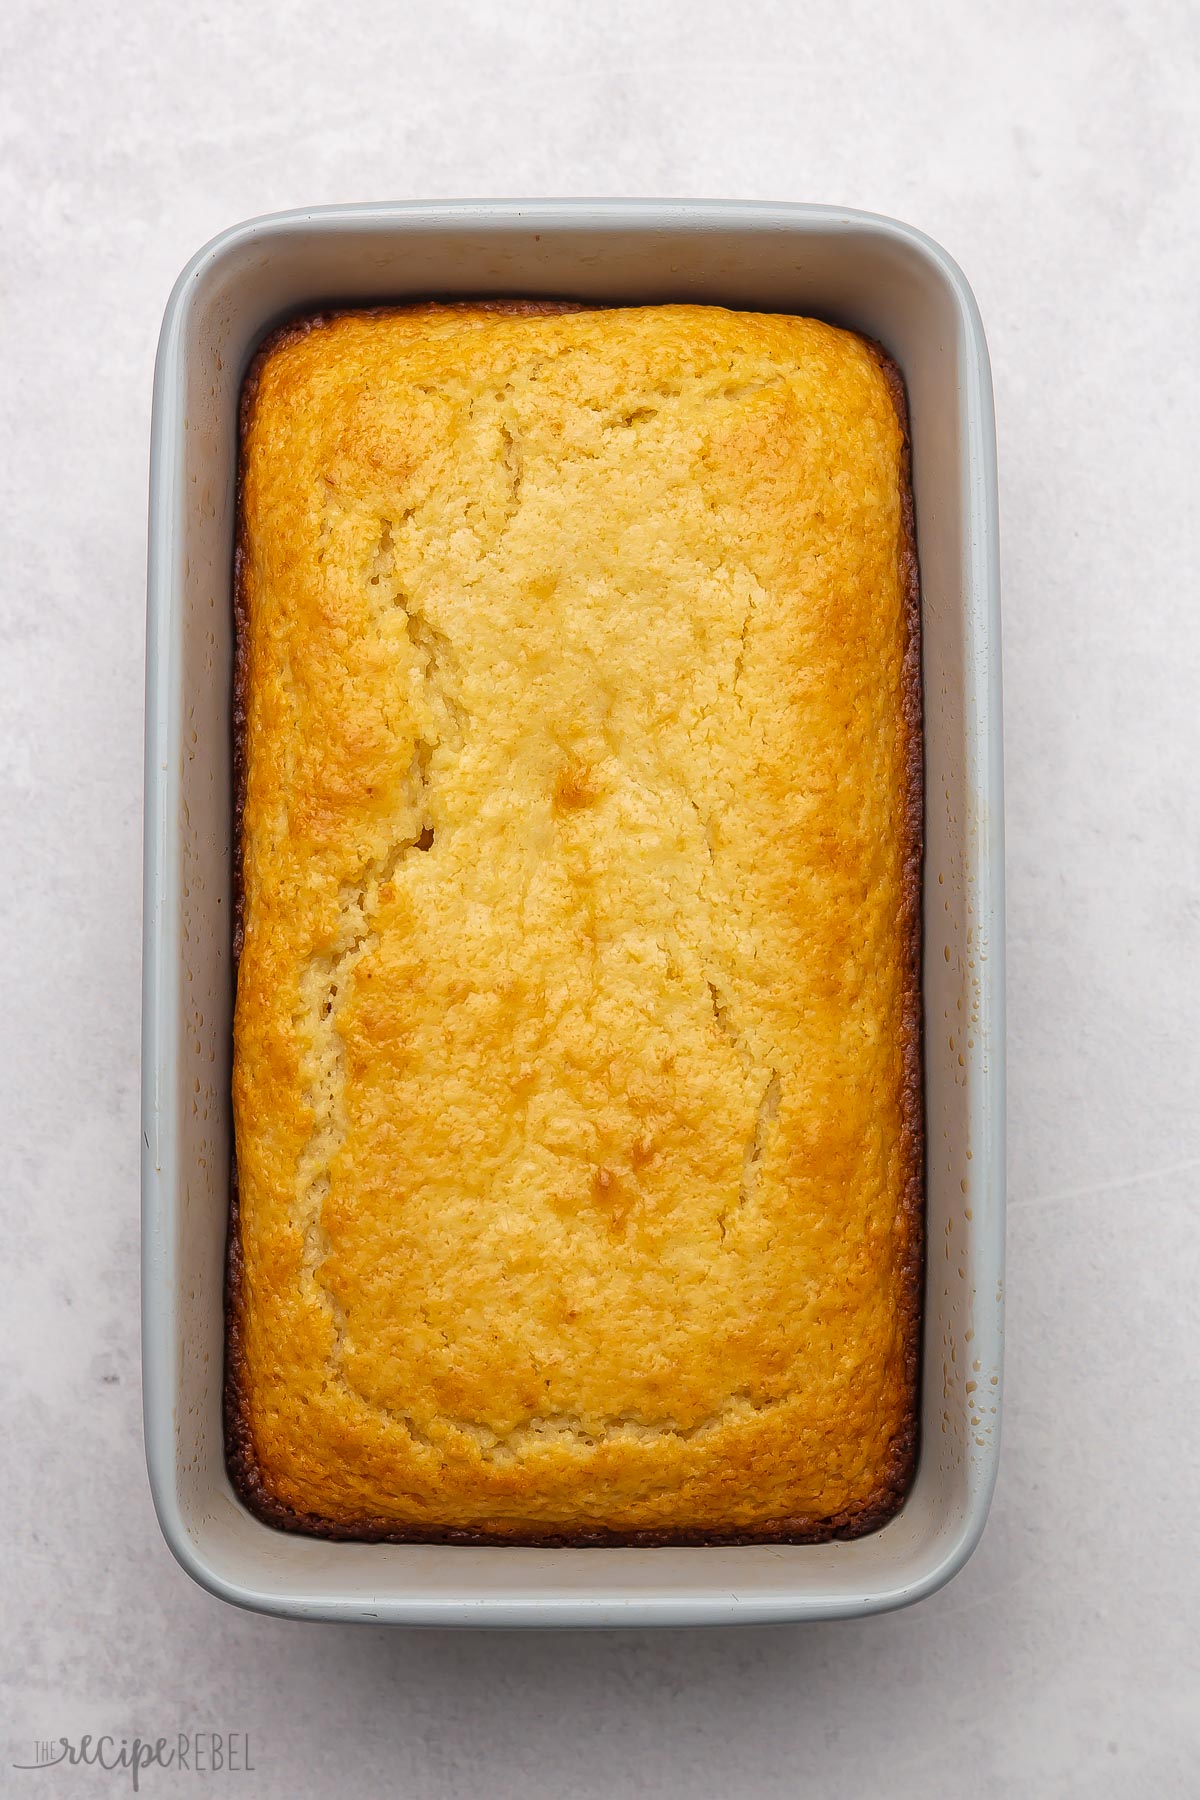 Overhead view of a pan of baked lemon bread on a grey surface.